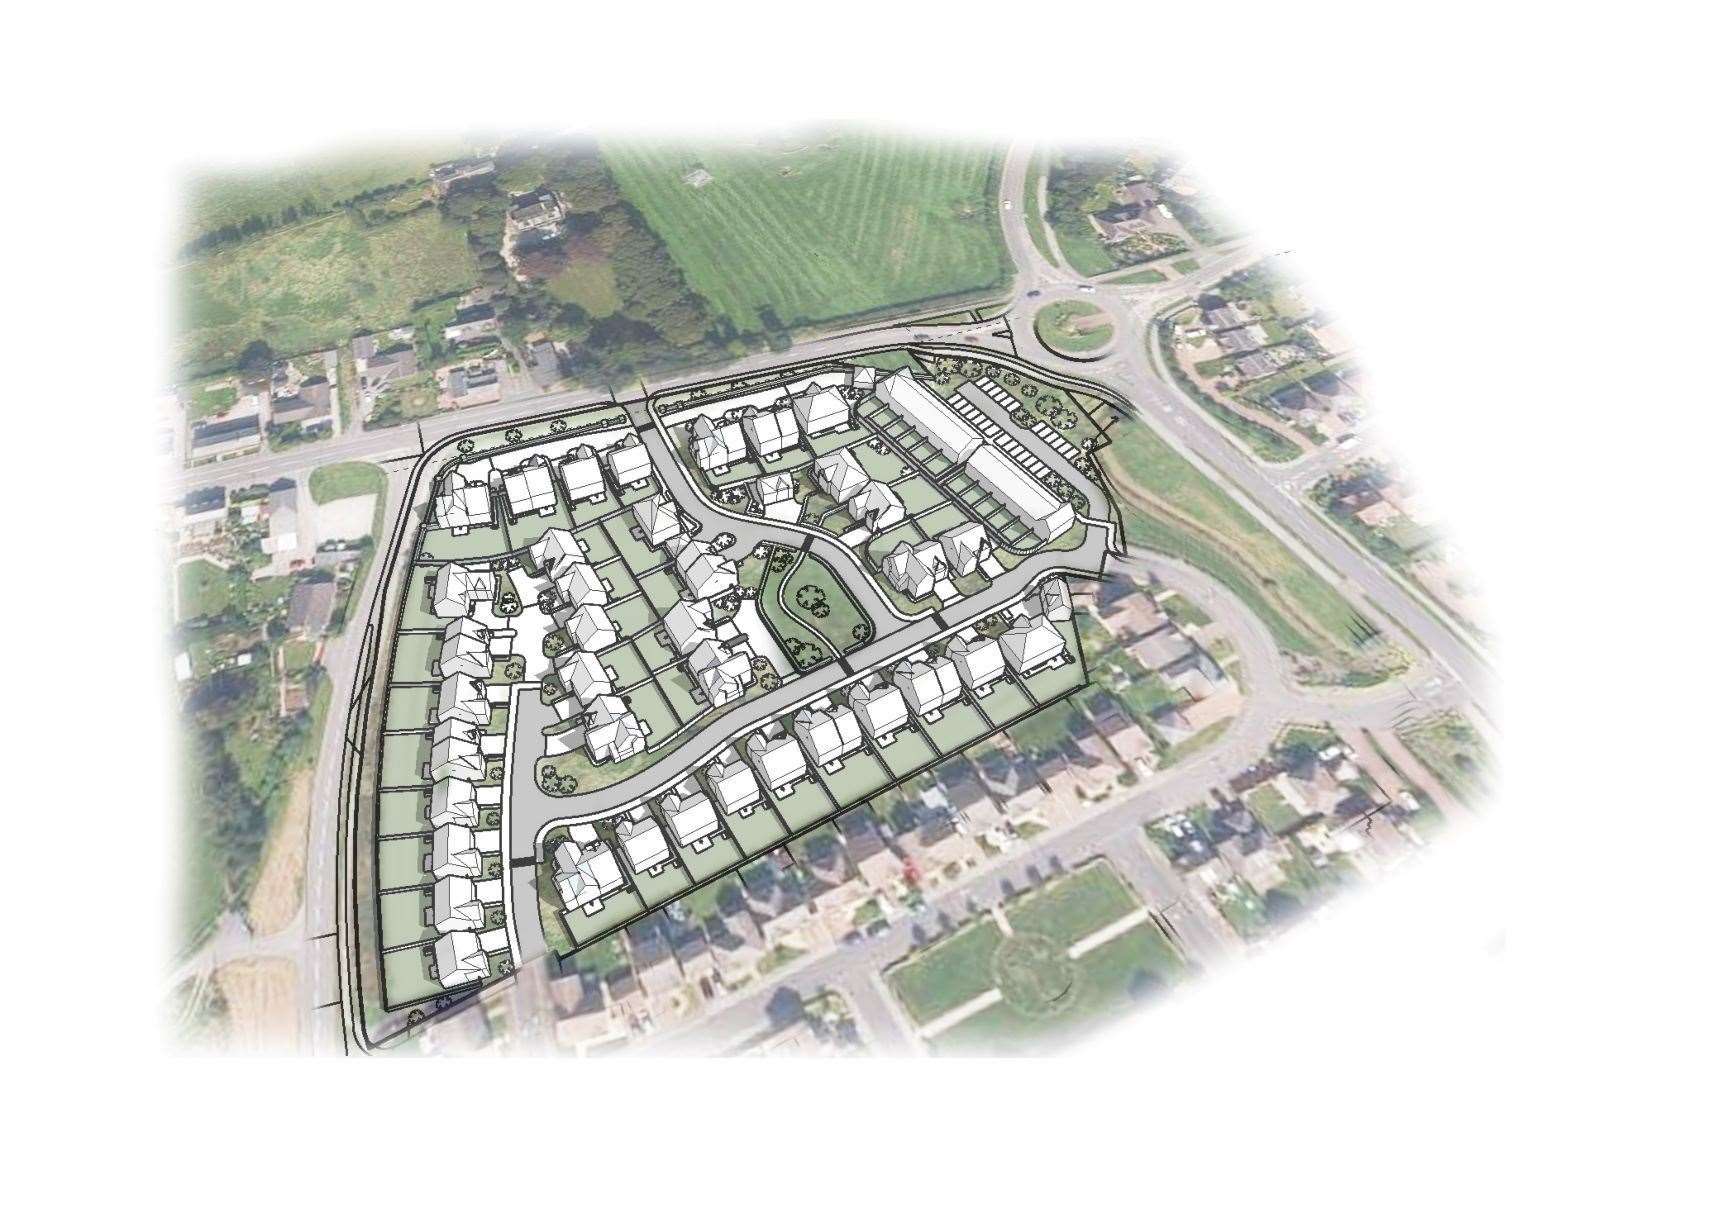 Indicative drawings of the new site at Westhill.